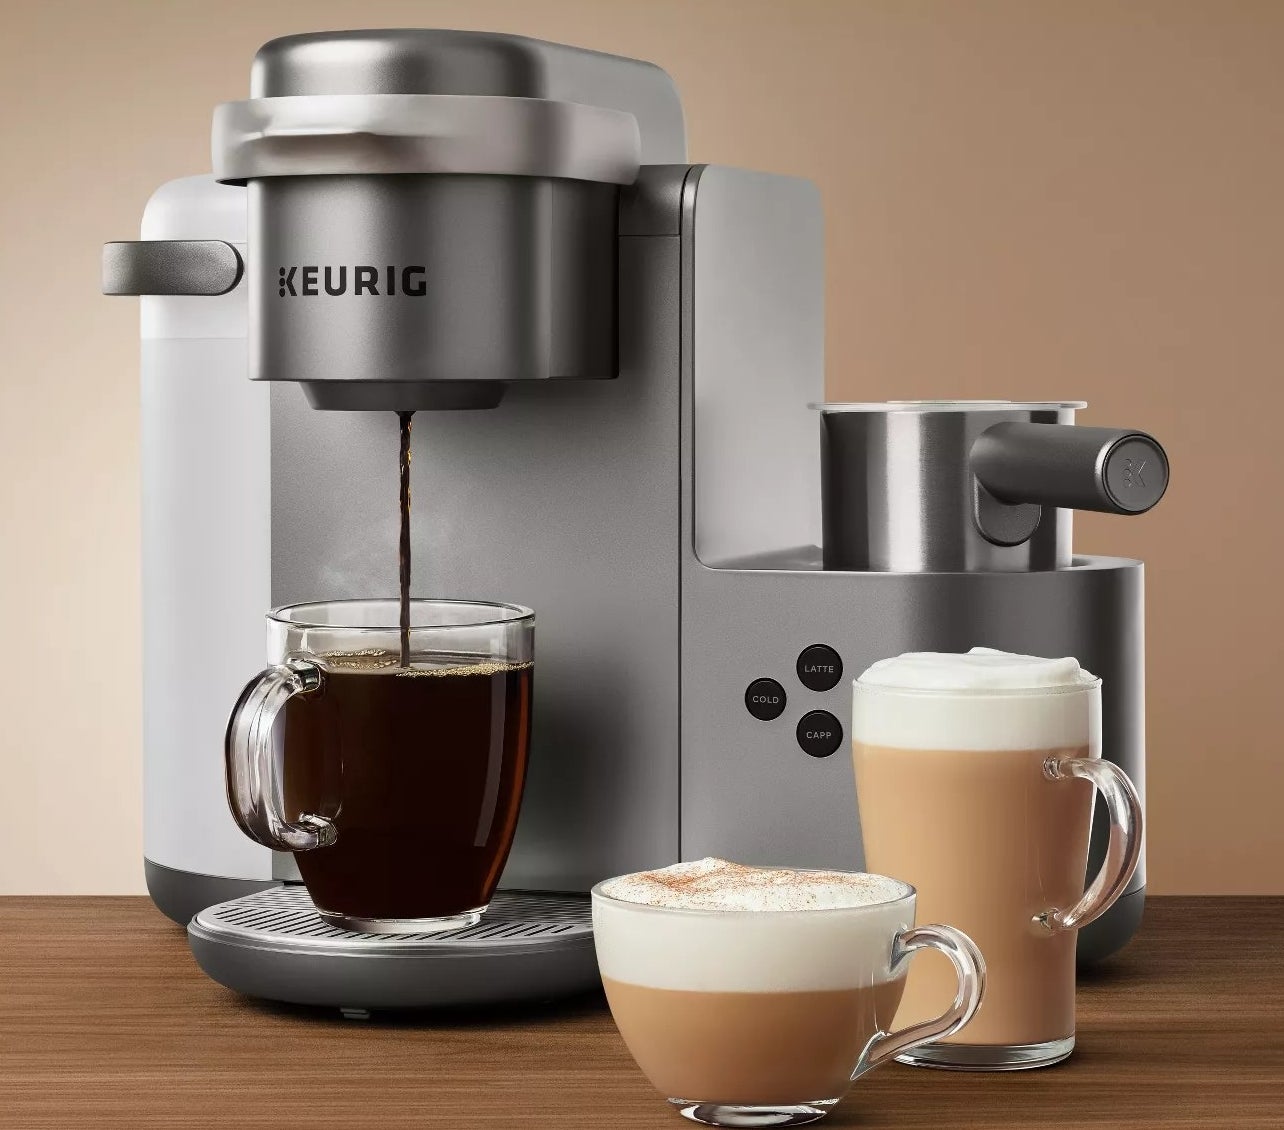 A Keurig making a cup of coffee next to a cappuccino and a latte